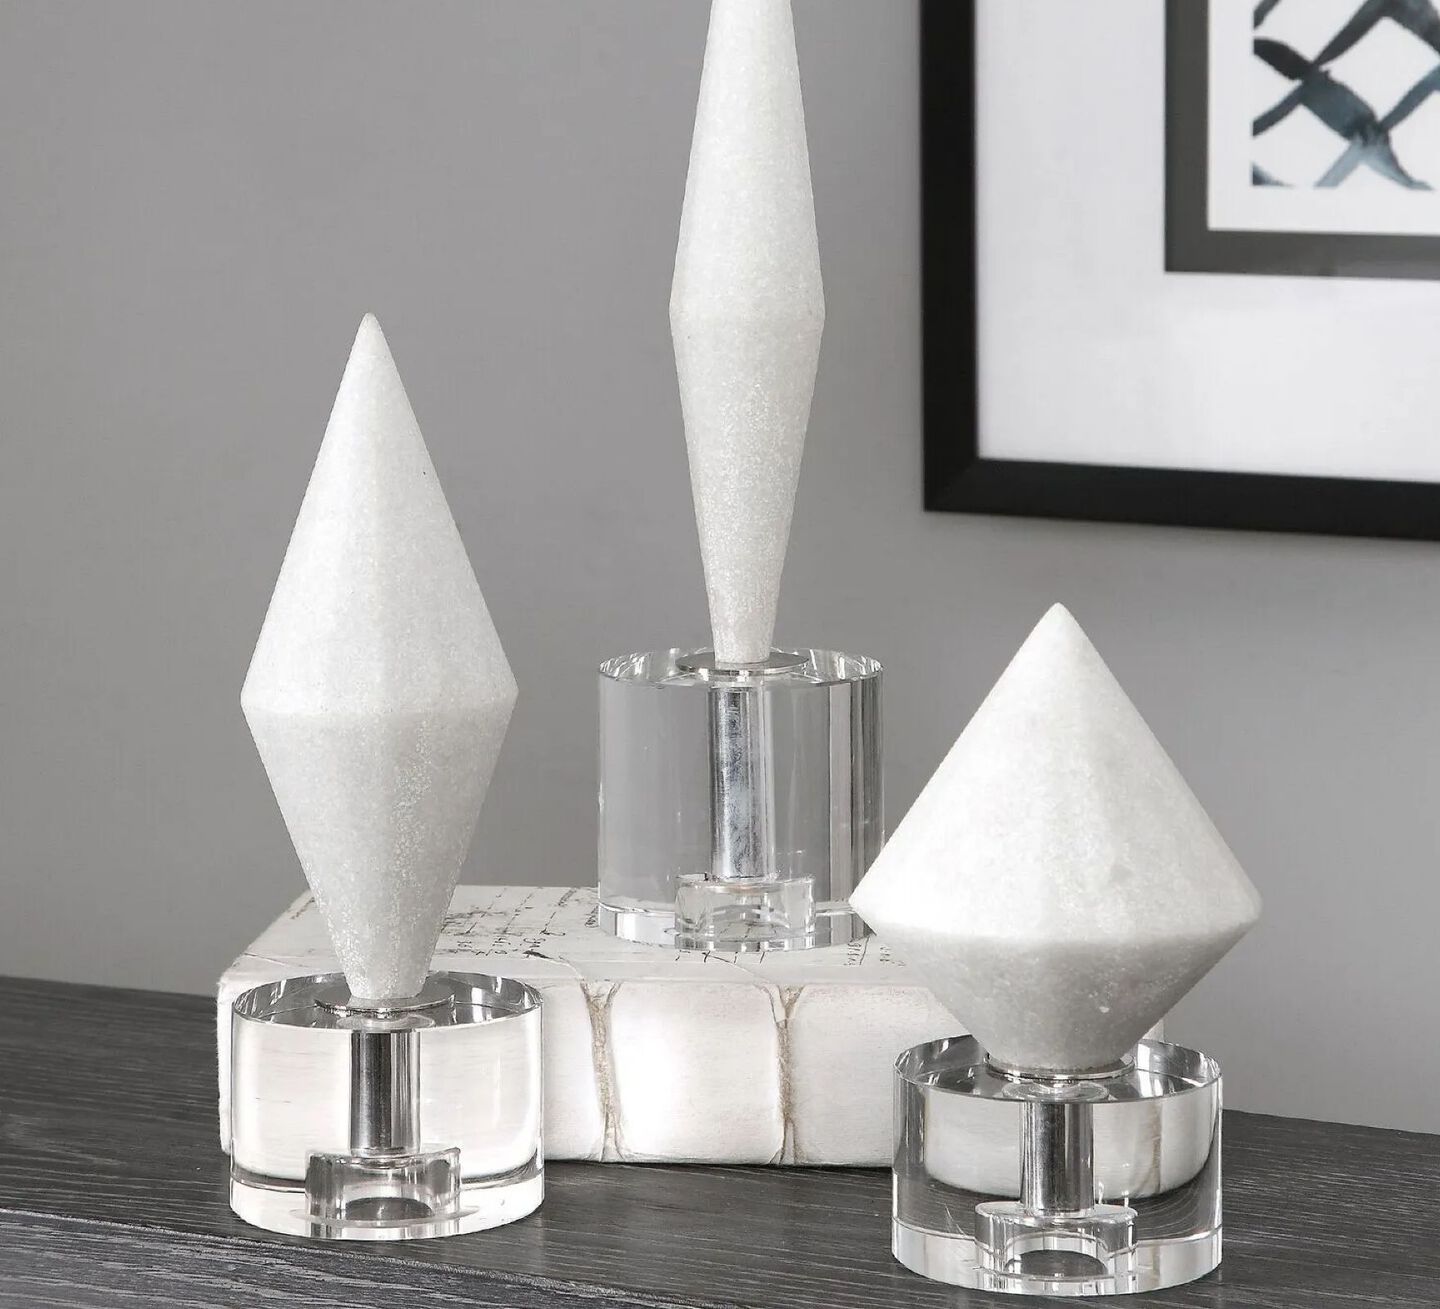 Three white stone sculptures sitting on top of glass bases